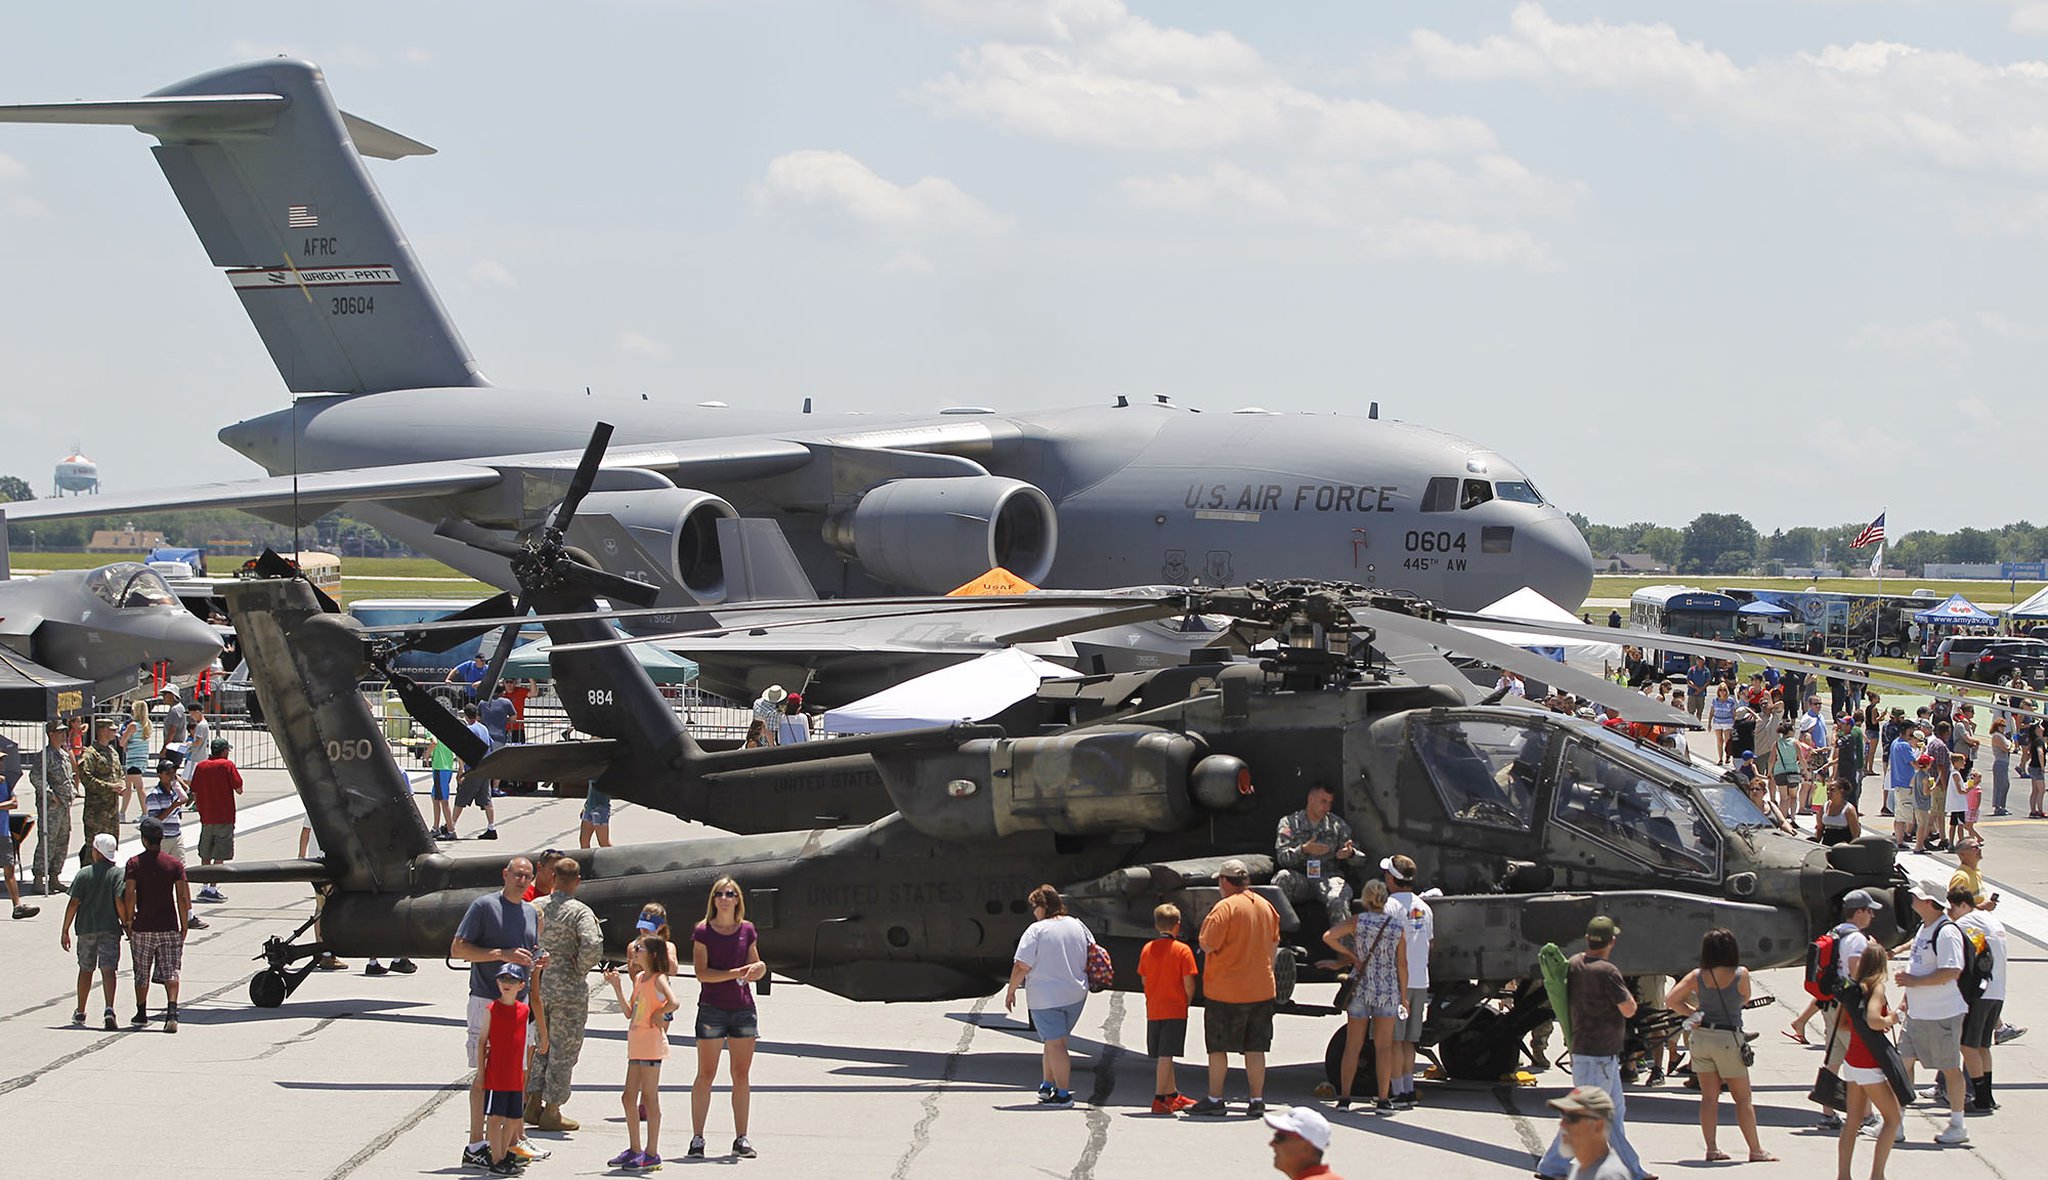 What to know to attend the 2021 Dayton Air Show